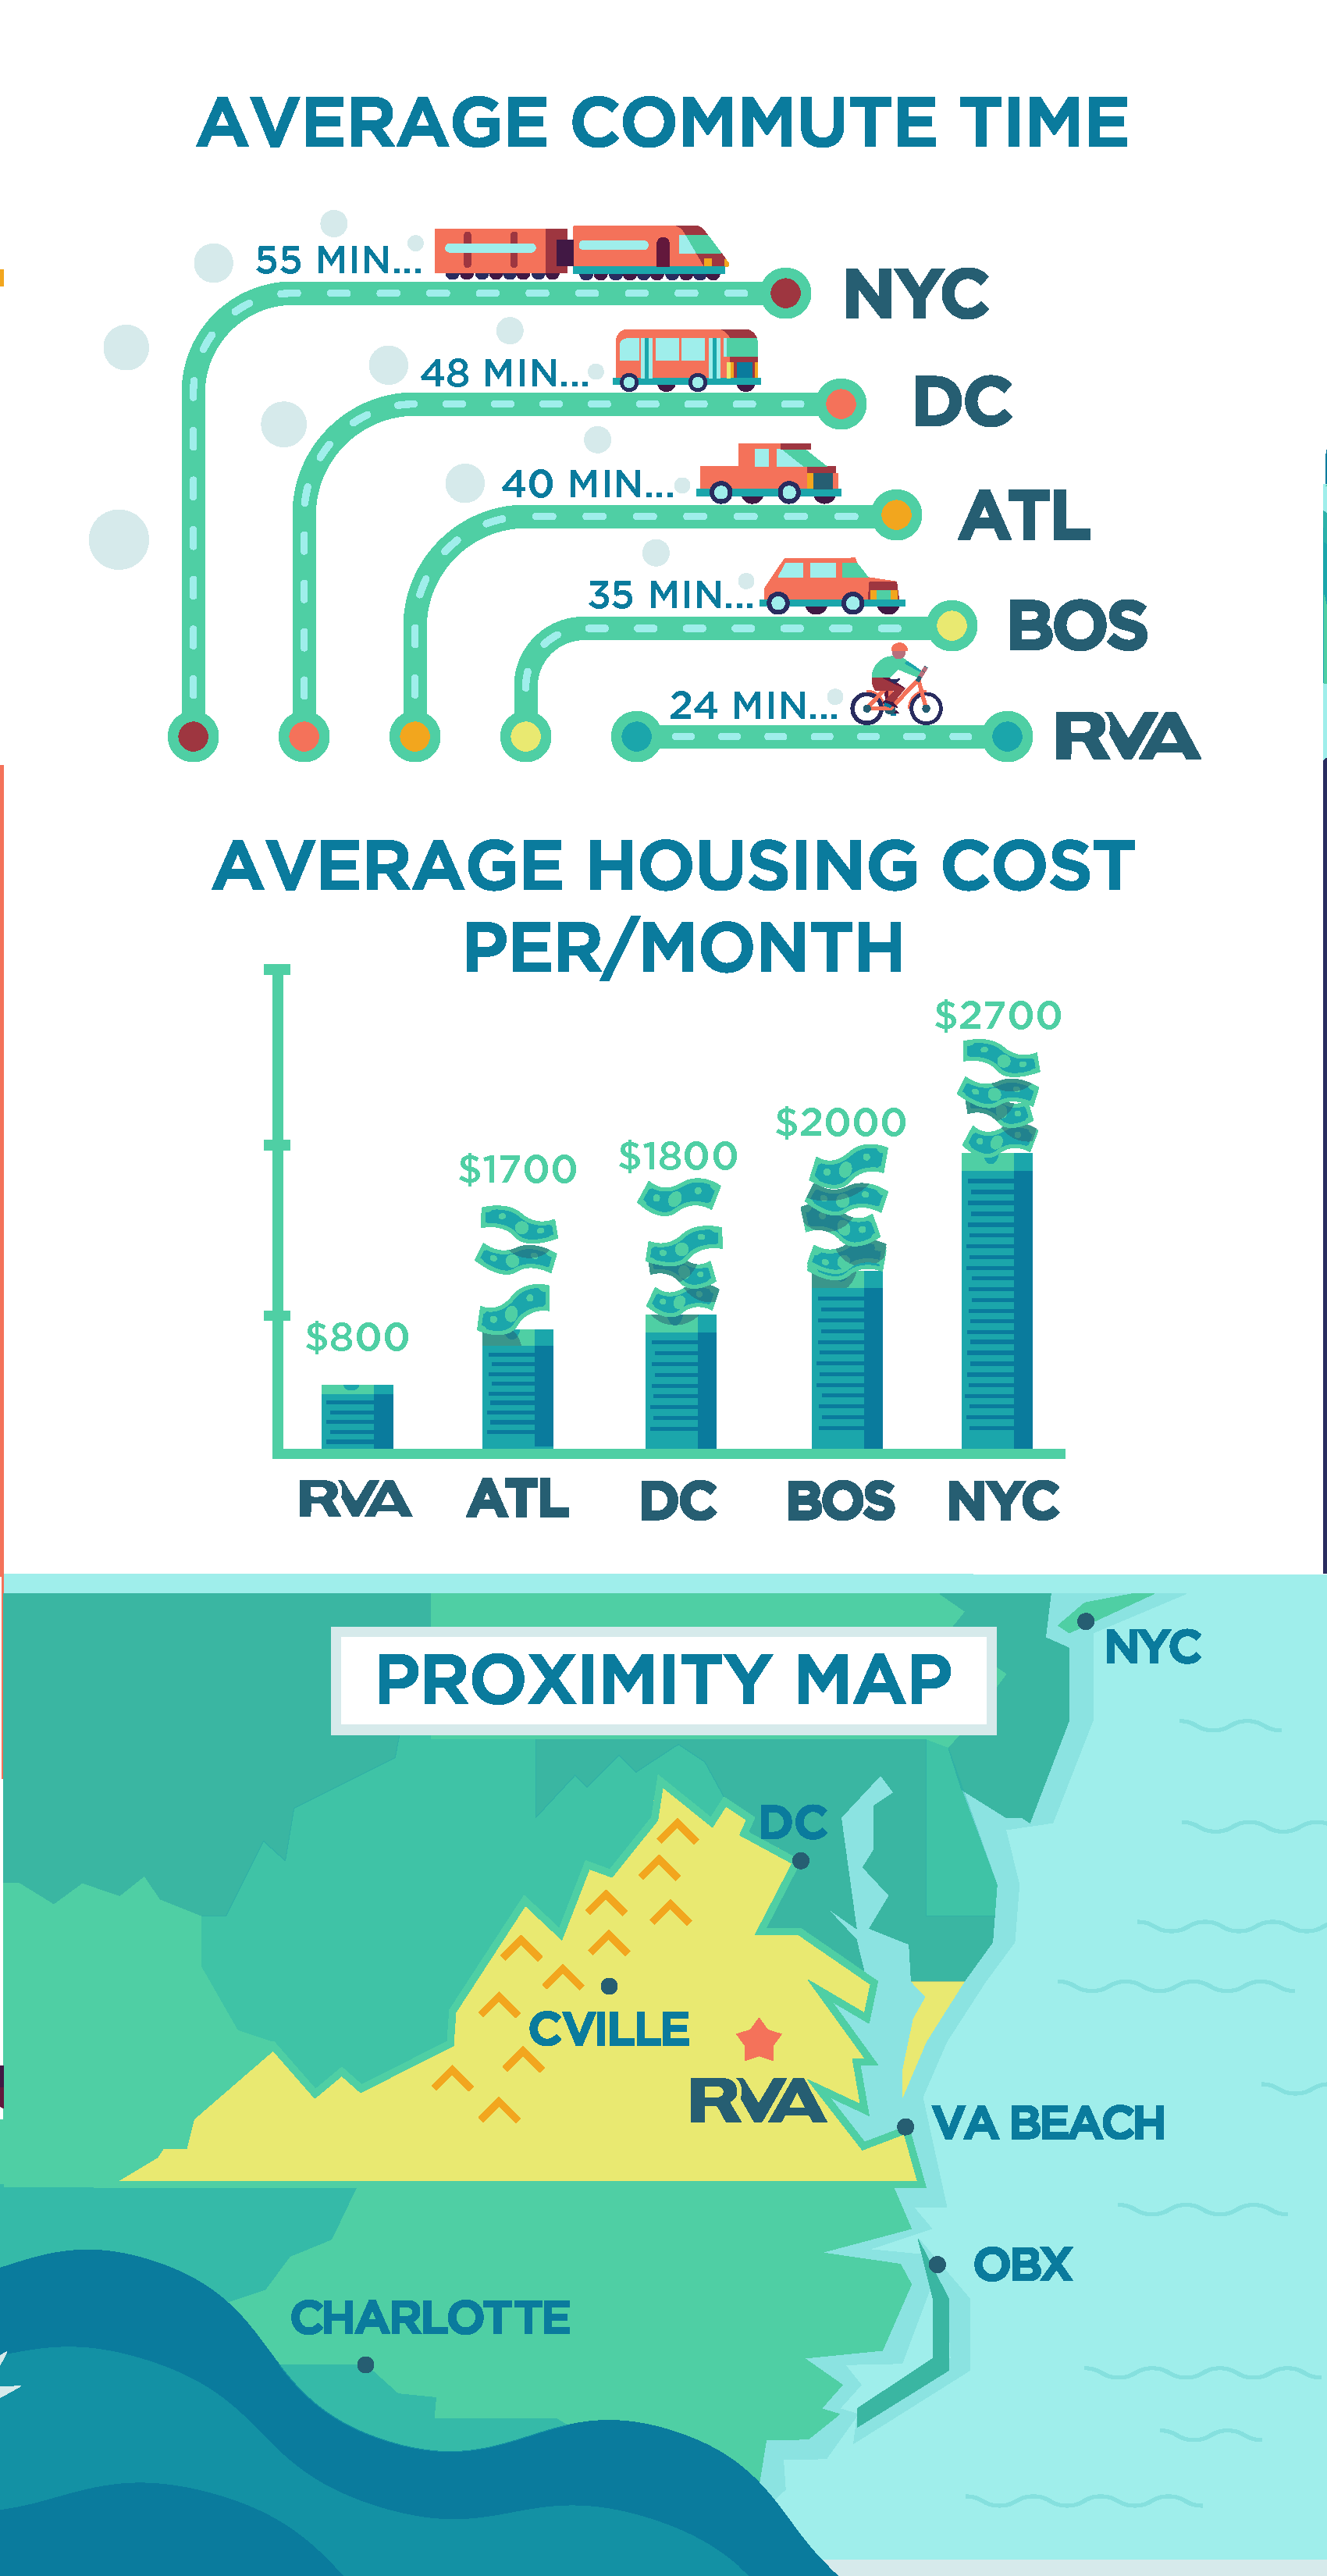 Infographic comparing commute and houses costs